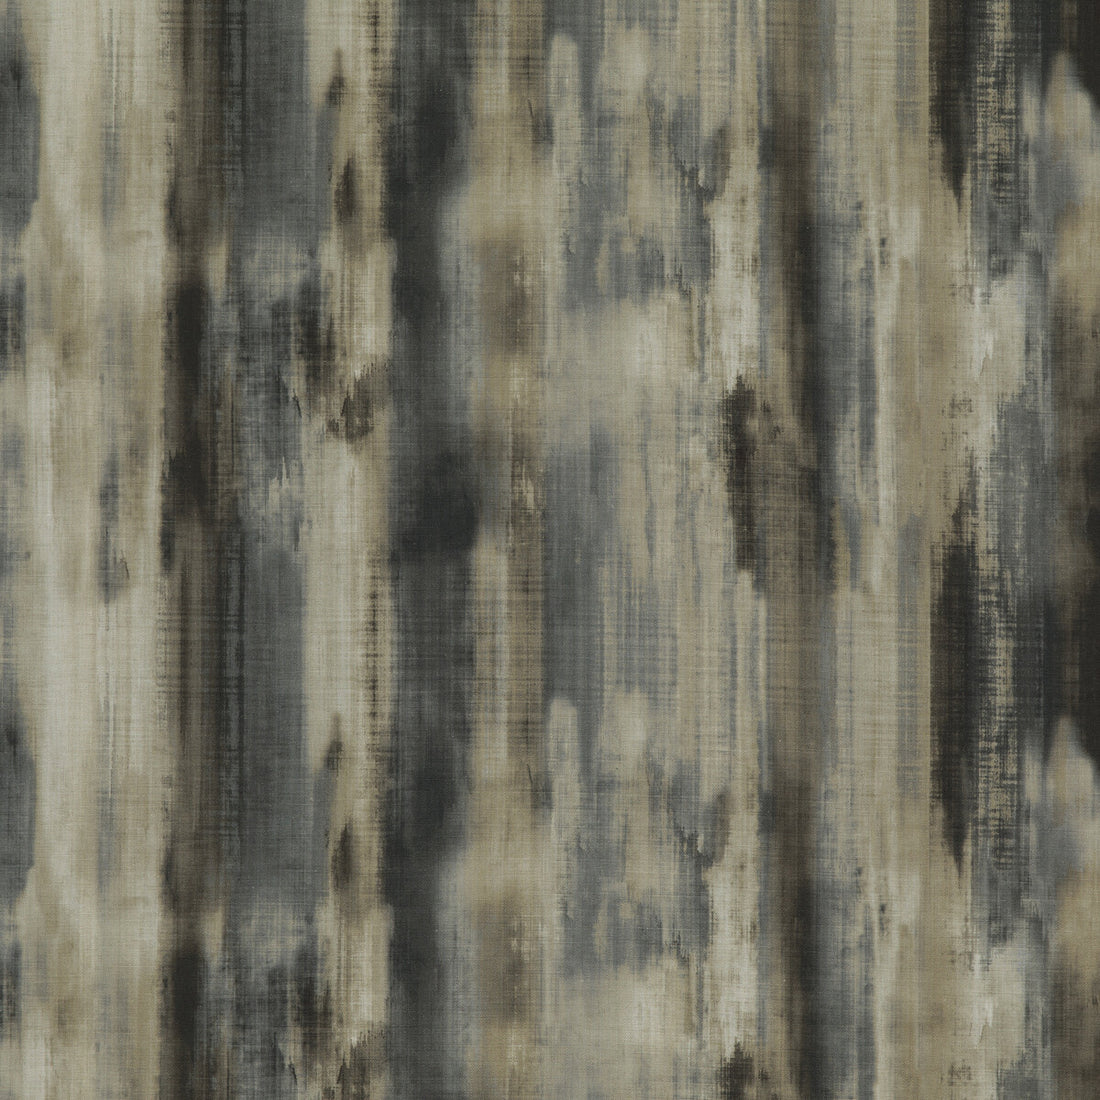 Fallingwater fabric in linen/charcoal color - pattern ED75033.3.0 - by Threads in the Moro collection